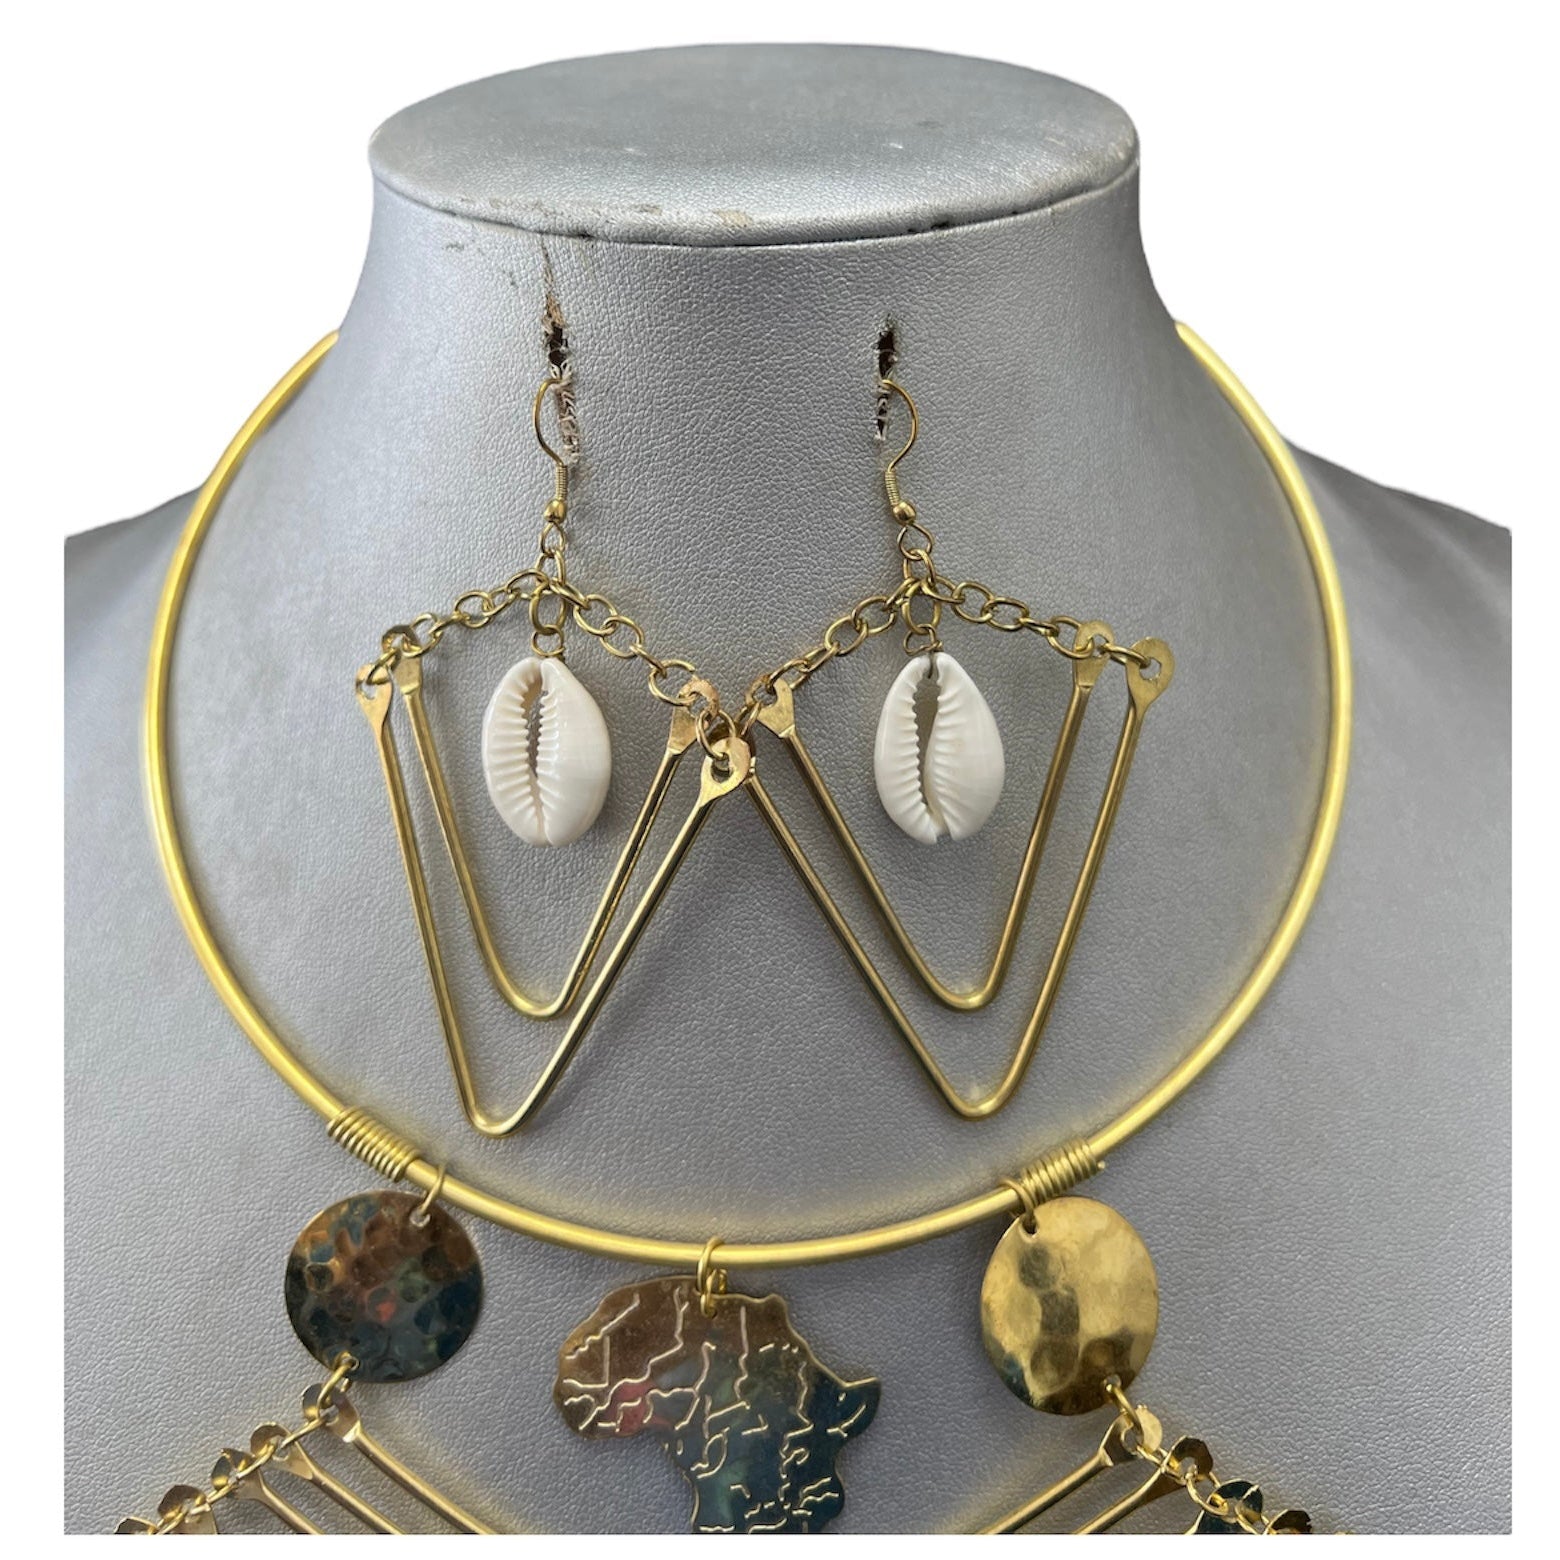 Women's Gold Metal Necklace Set with Africa Map and Cowrie Shells -- Jewelry 57